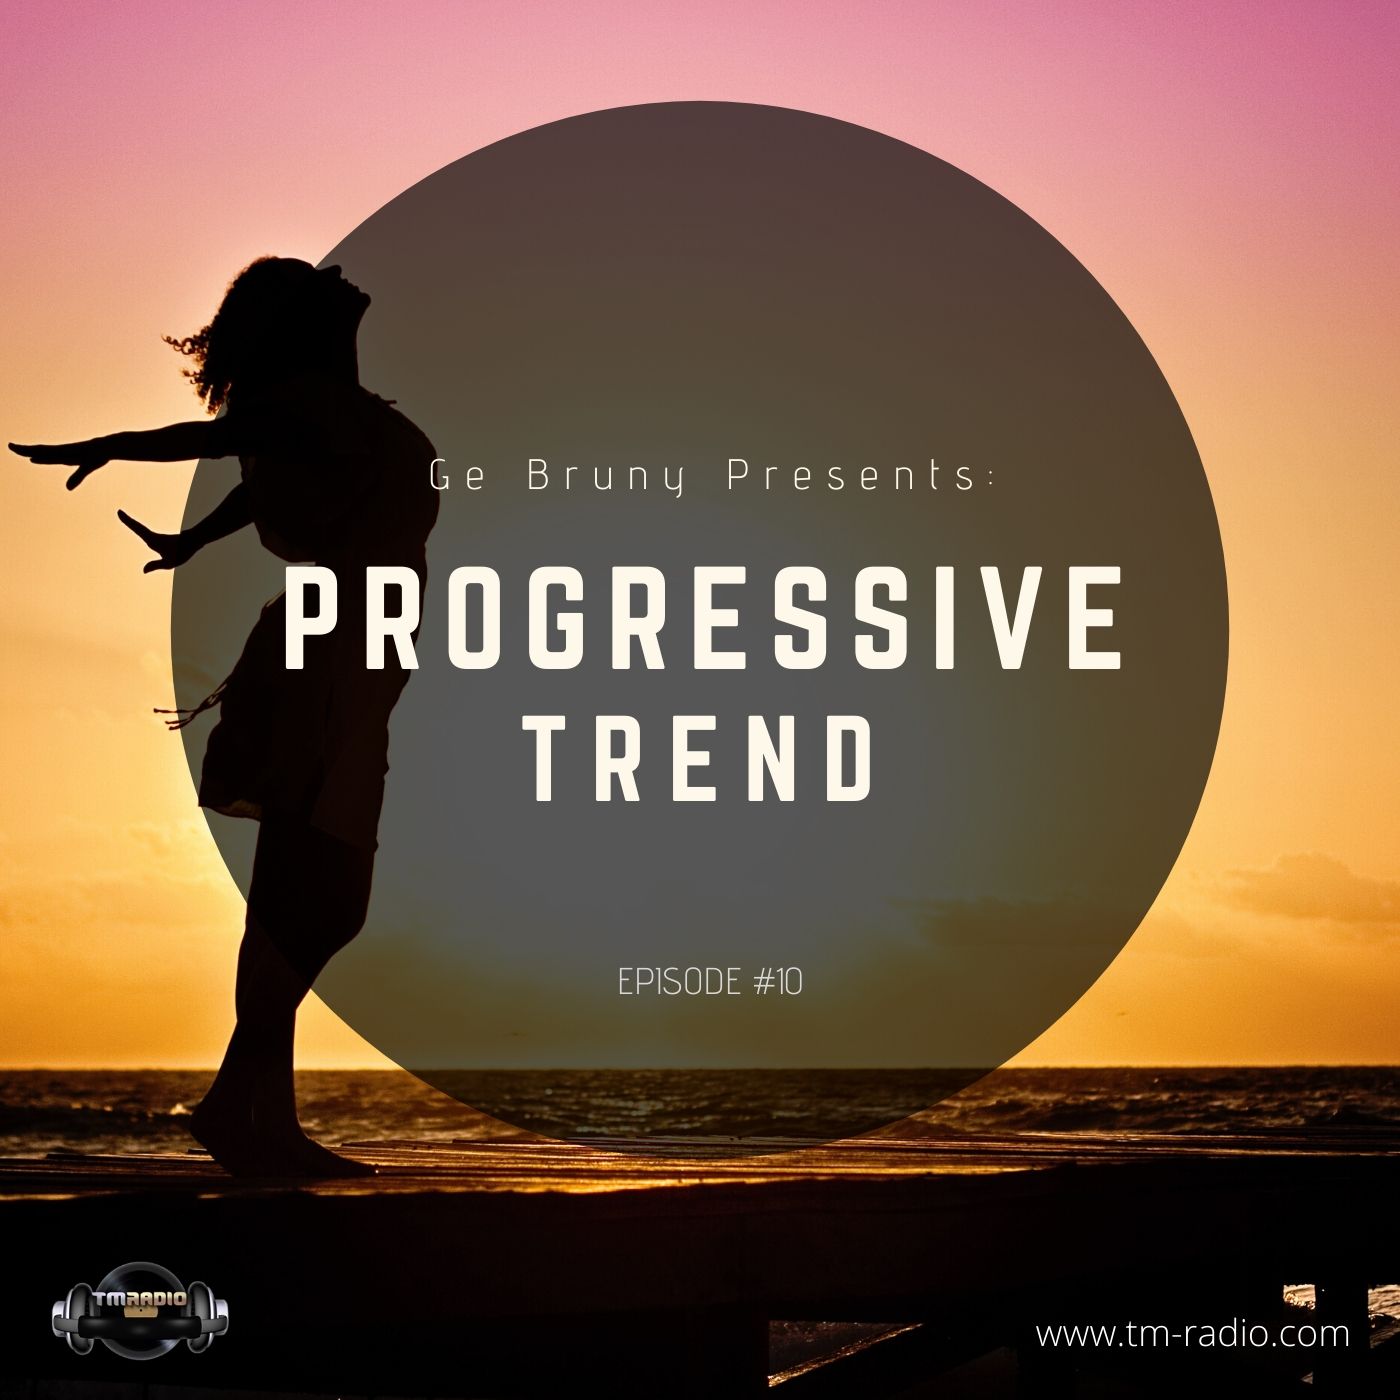 Ge Bruny presents: Progressive Trend :: Episode 10 (aired on January 18th, 2020) banner logo